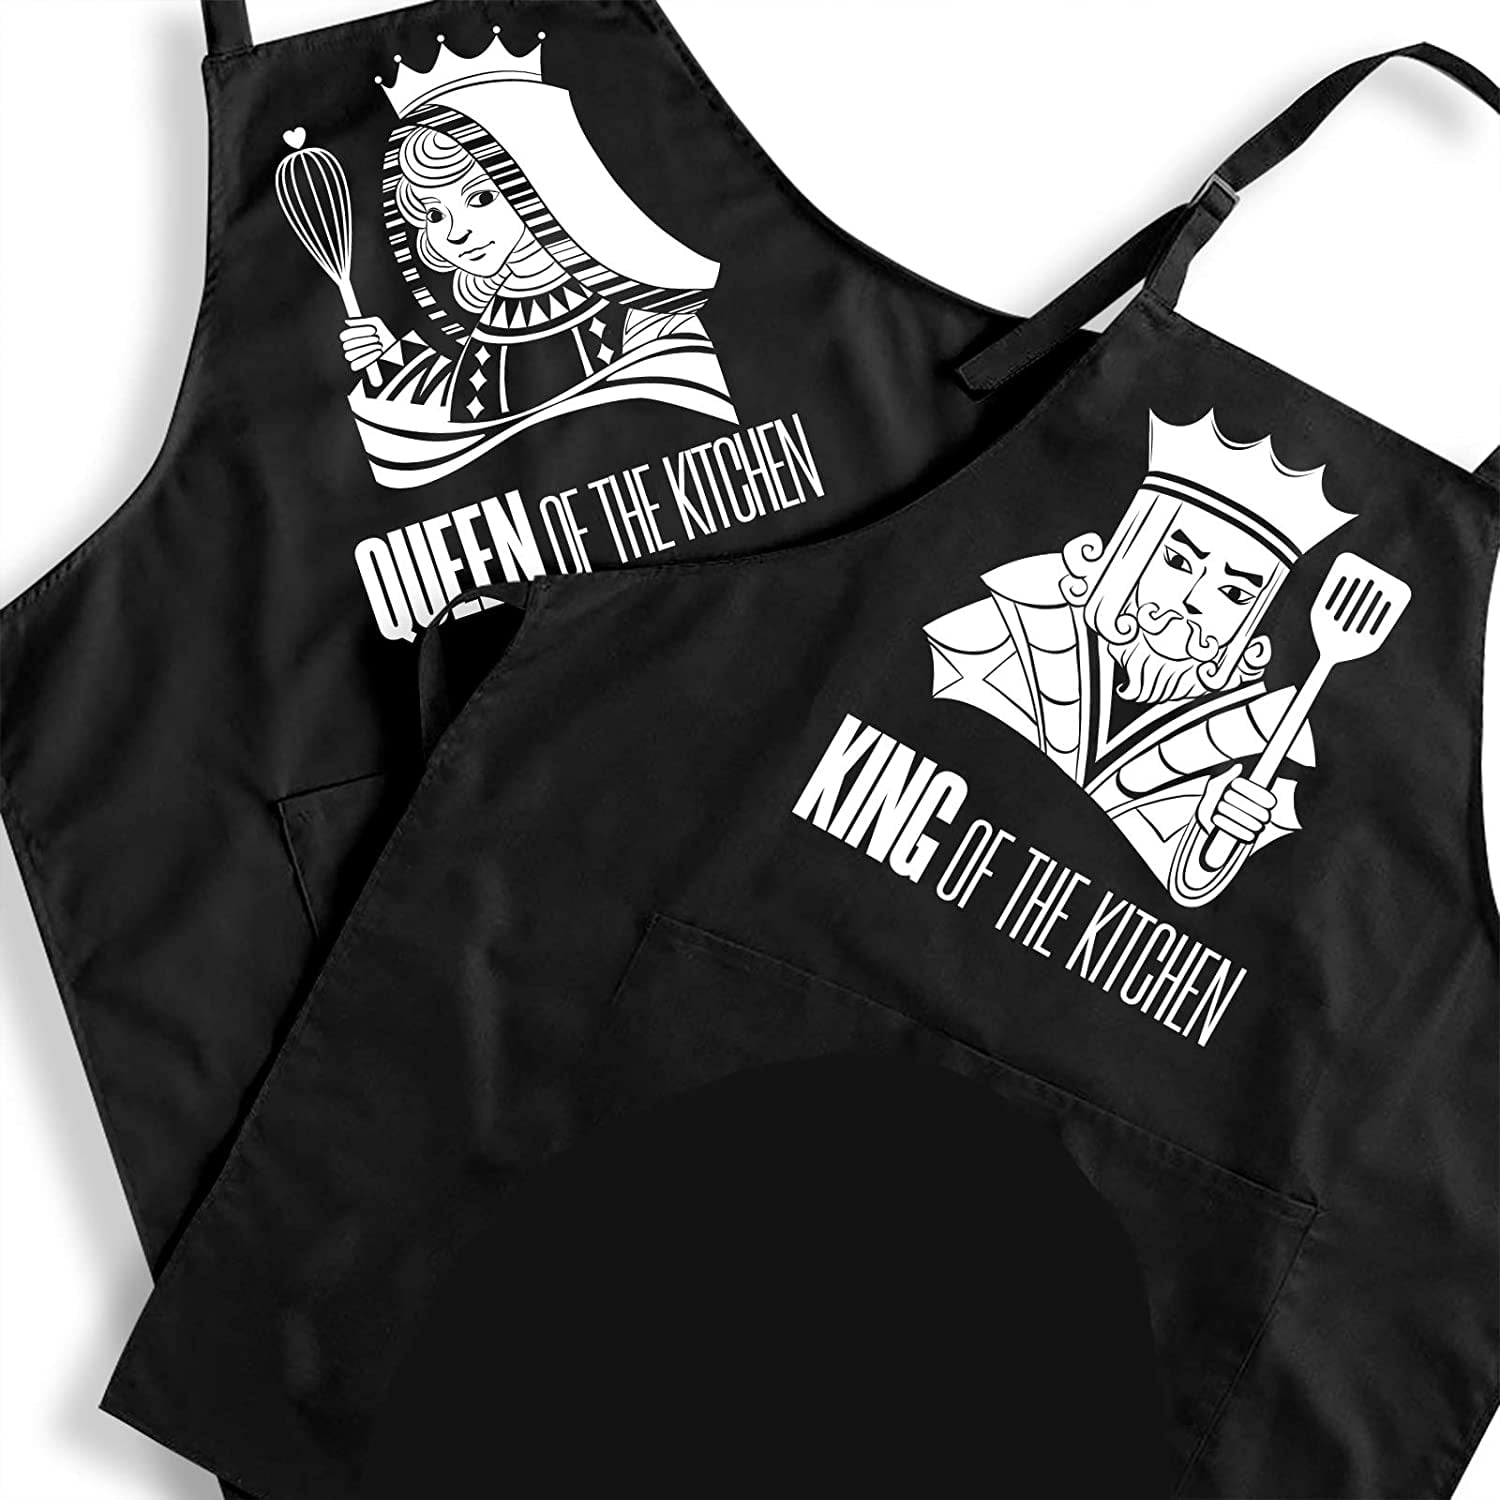 Anniversary Couple Gifts Wedding Gifts for Couple,Aprons for Couples Mr and Mrs 2 Pieces Kitchen Aprons Set Gifts